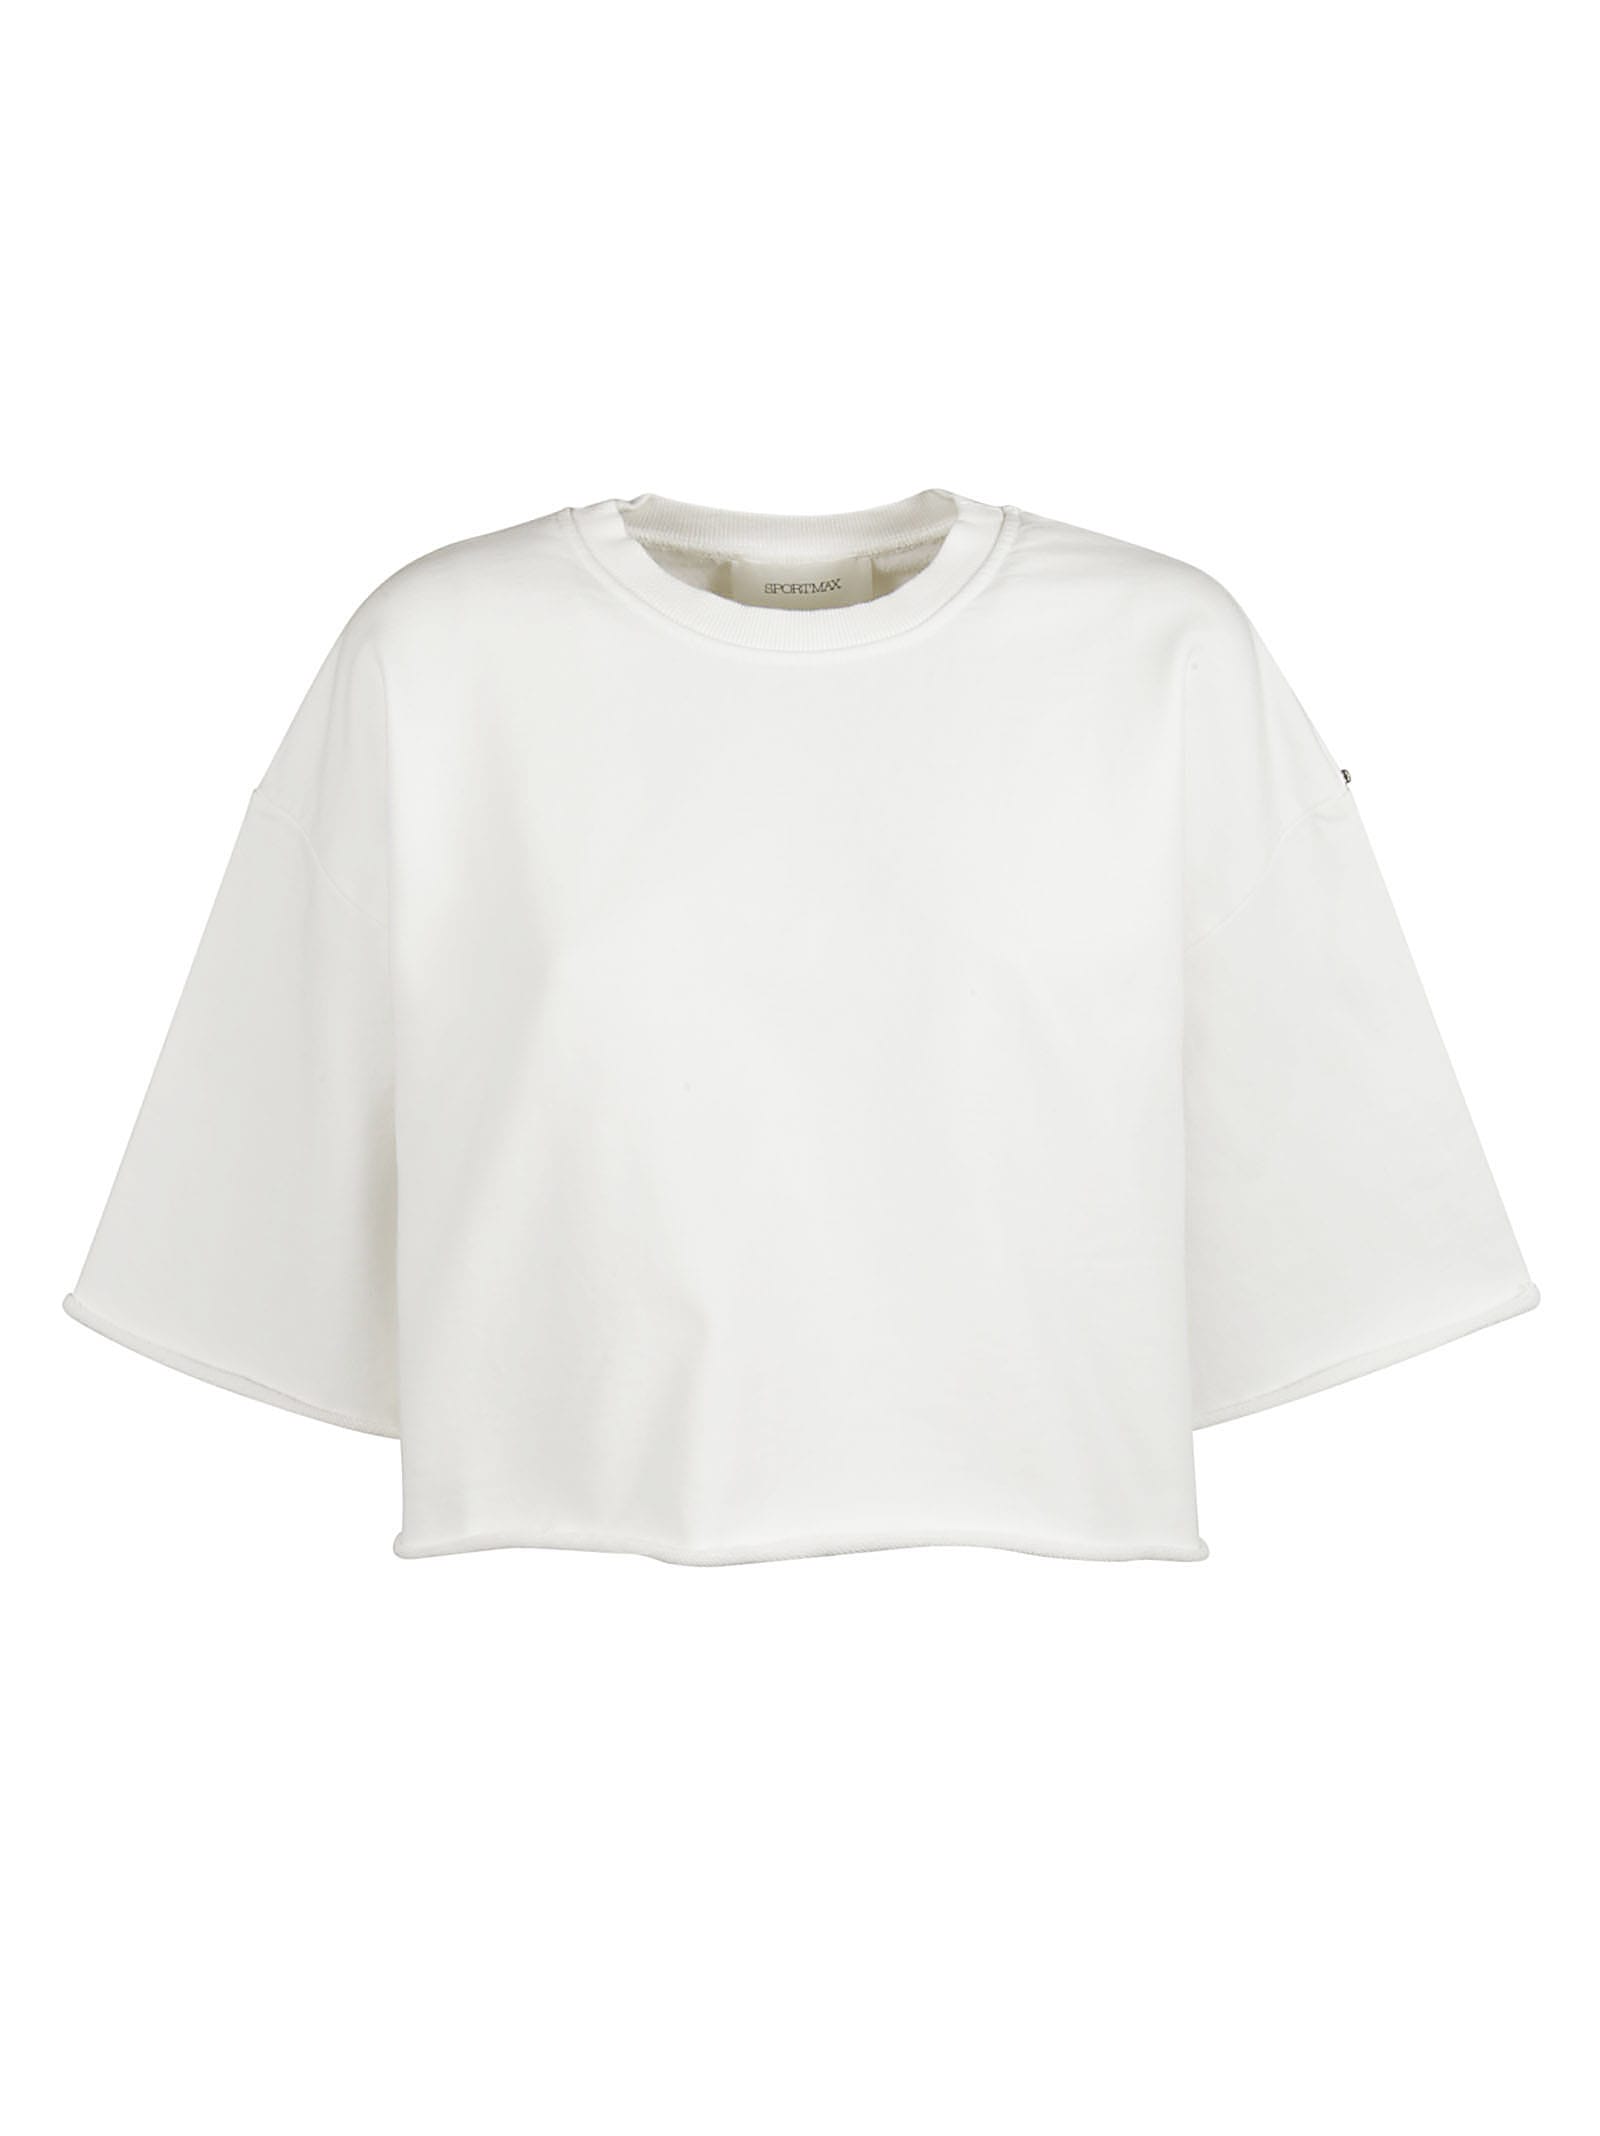 SportMax Cetro Cropped T-shirt